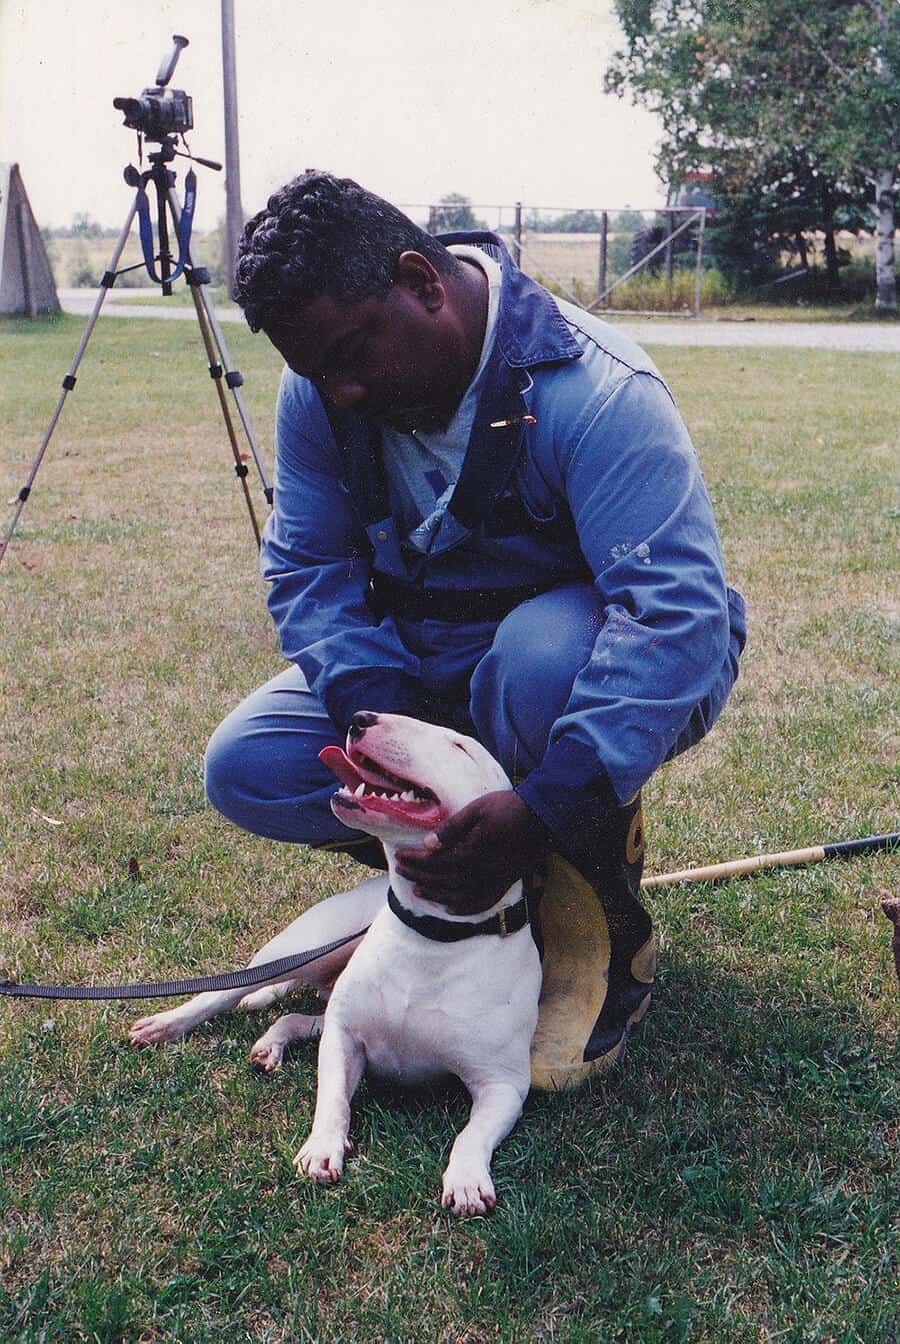 Roger Richards with a Dog in Training at TorontoK9Center.com